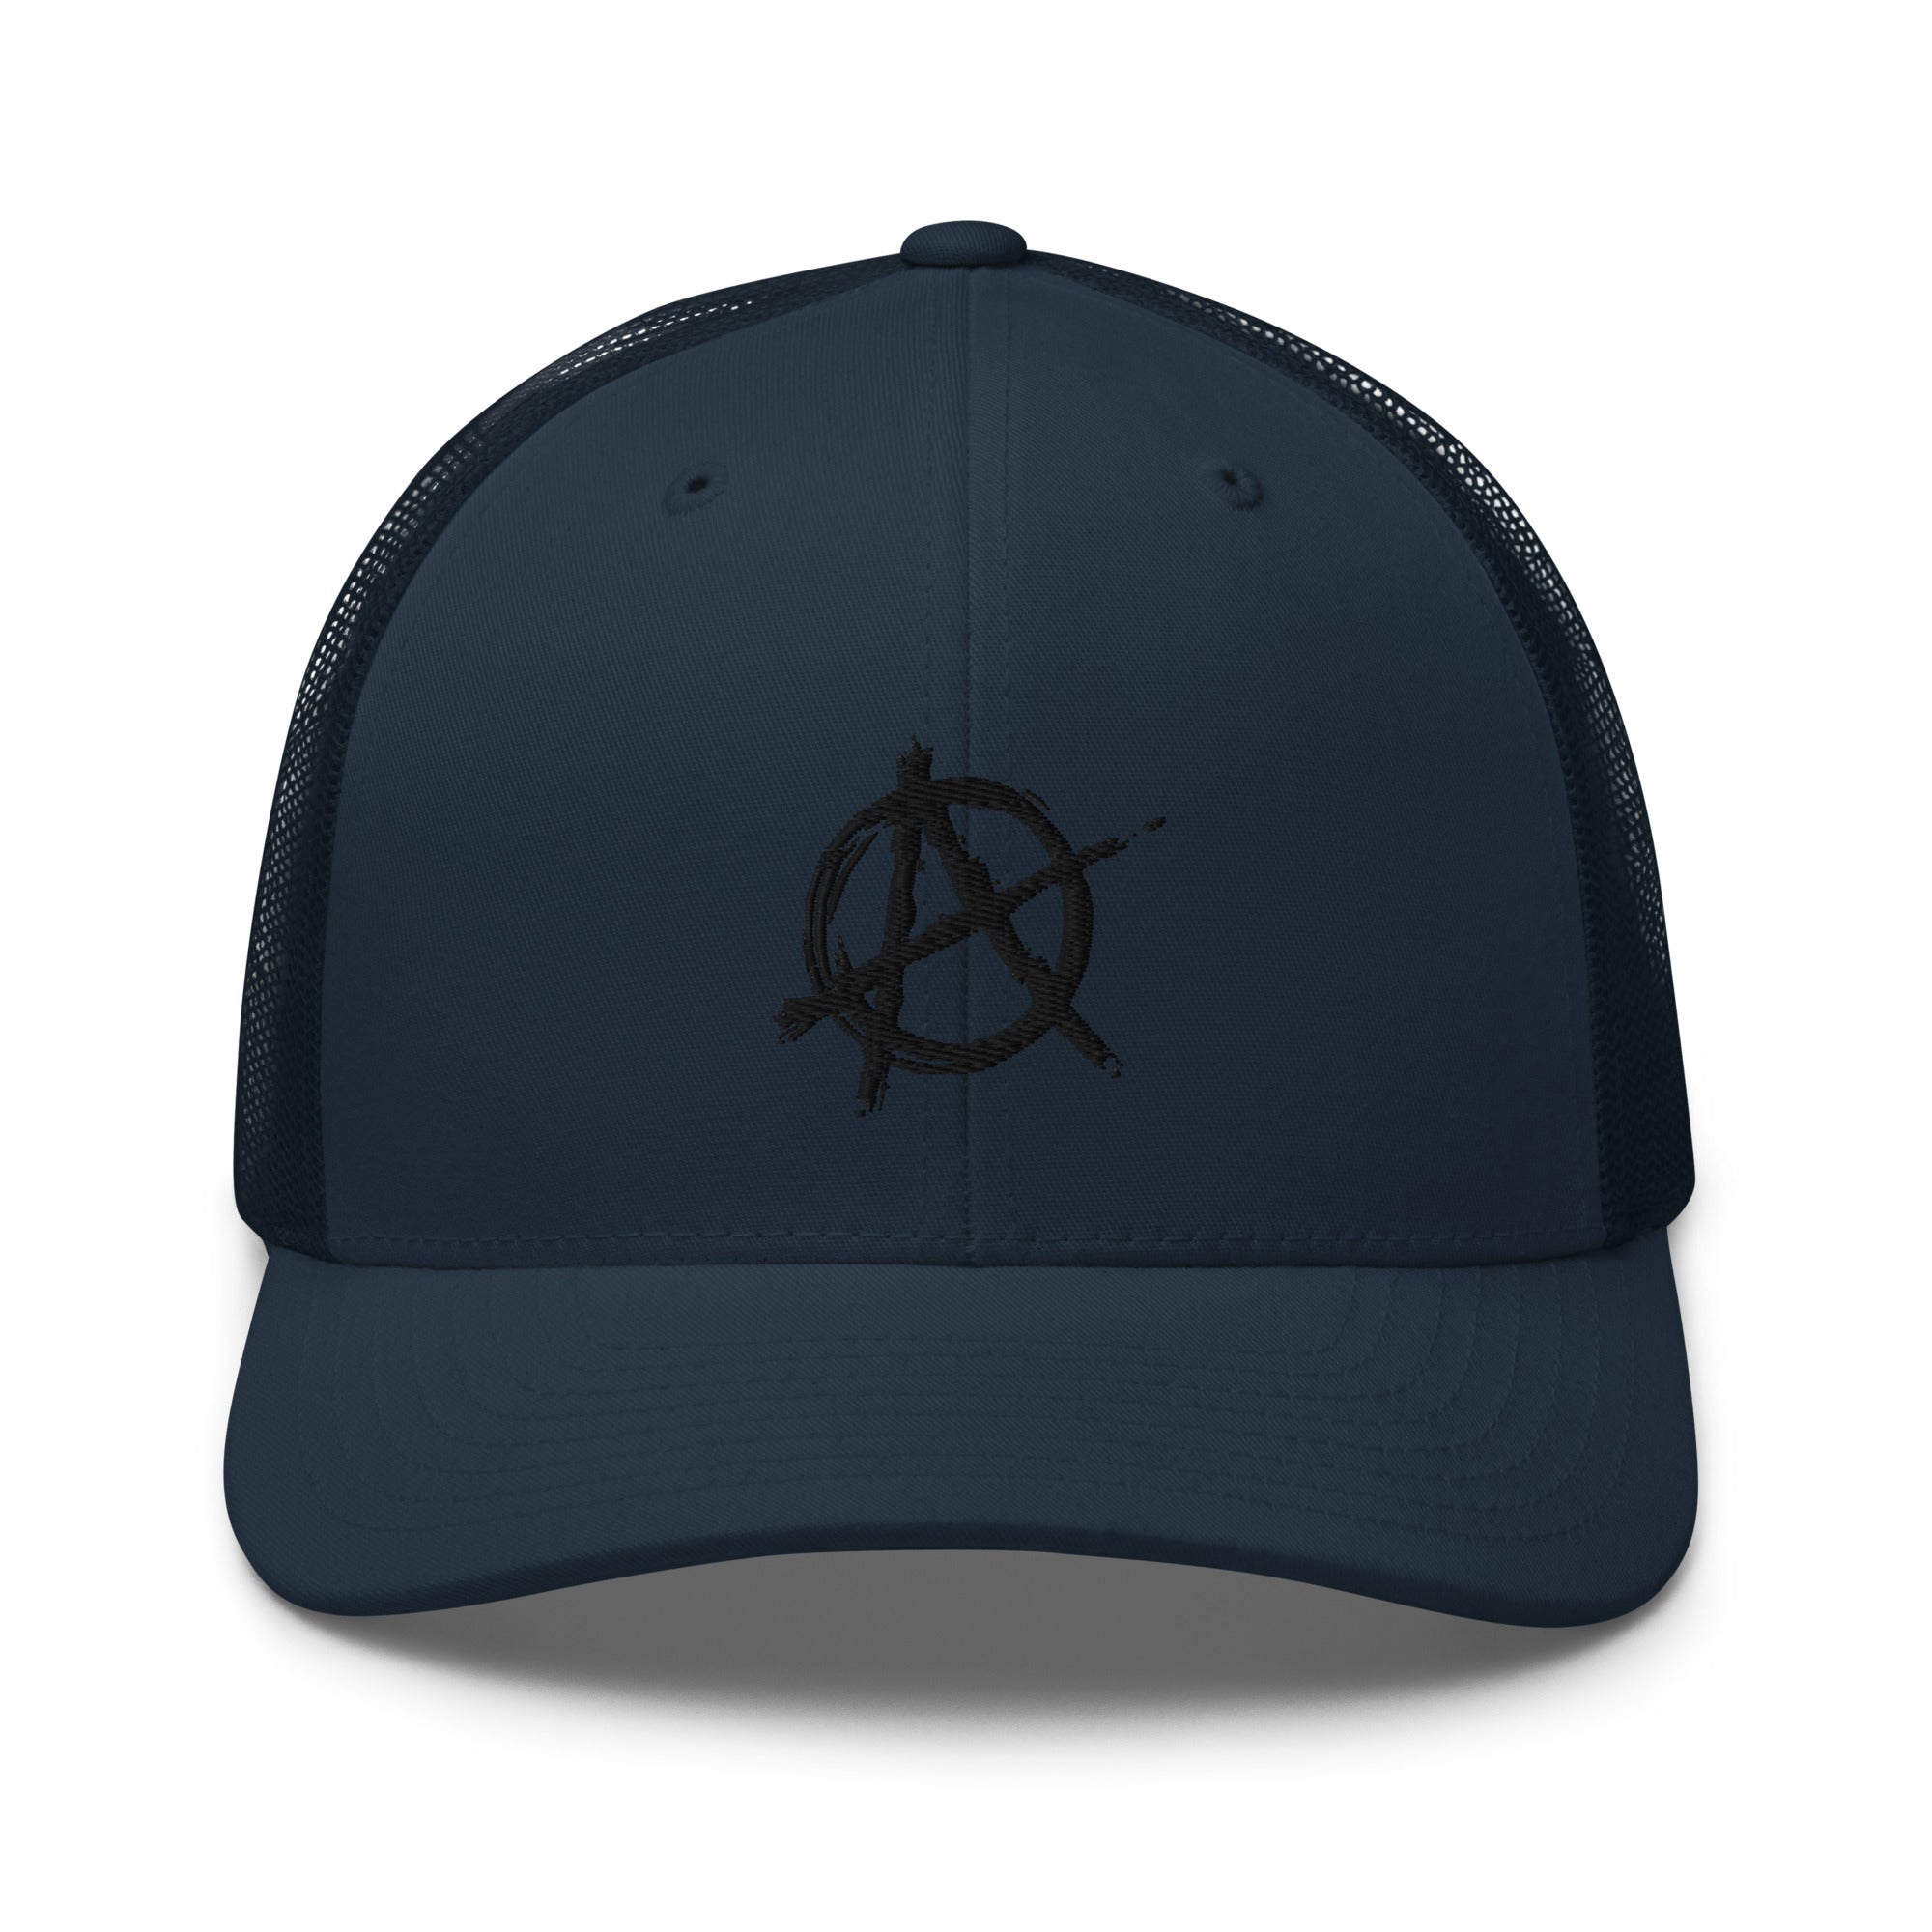 Black Anarchy Sign Punk Rock Chaos Embroidered Retro Trucker Cap Snapback Hat